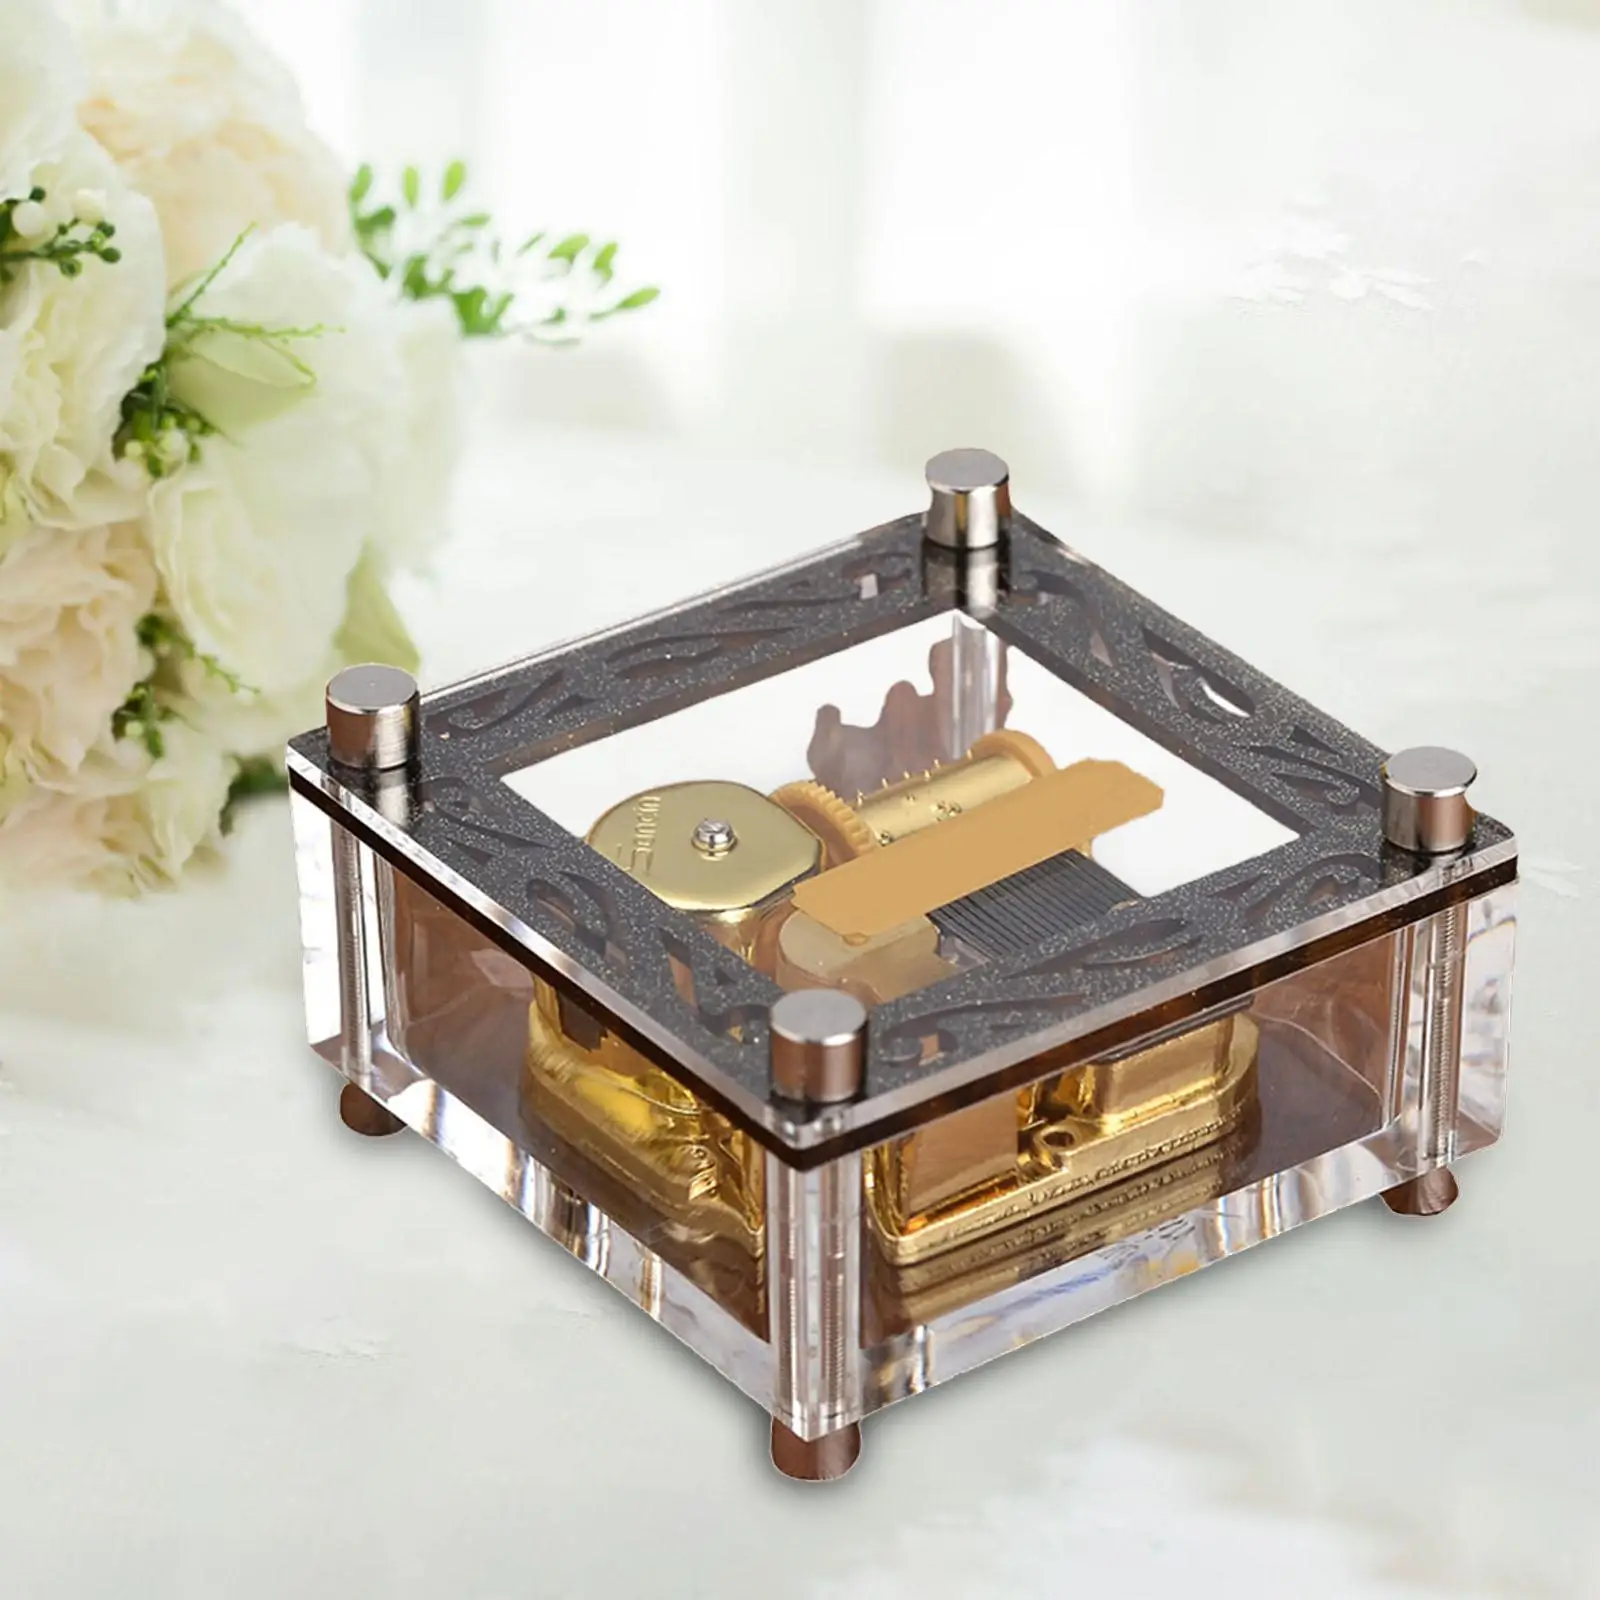 Unique Music Box Acrylic with Gold Plating Clear Mechanism Durable for Birthday Gift Christmas Day Wedding Families Teen Adults